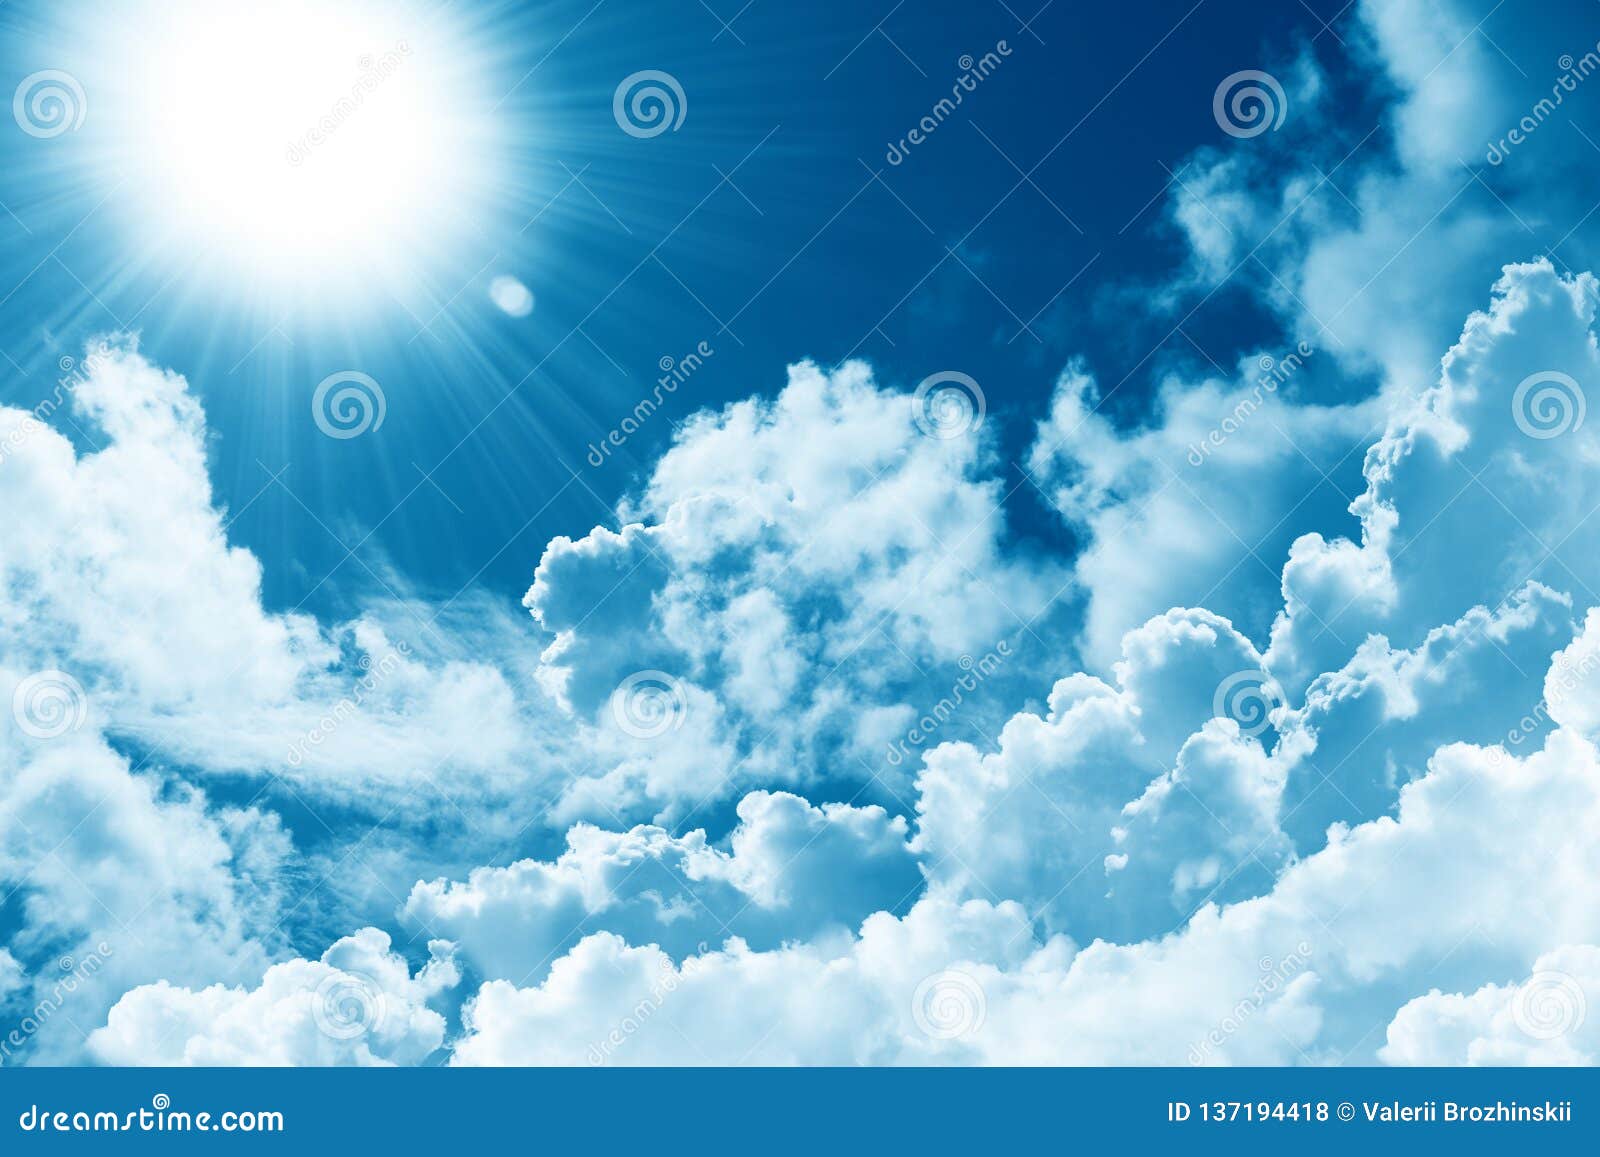 beautiful blue sky white cloud sunshine. religion concept heavenly background. divine heavenly light. peaceful nature background